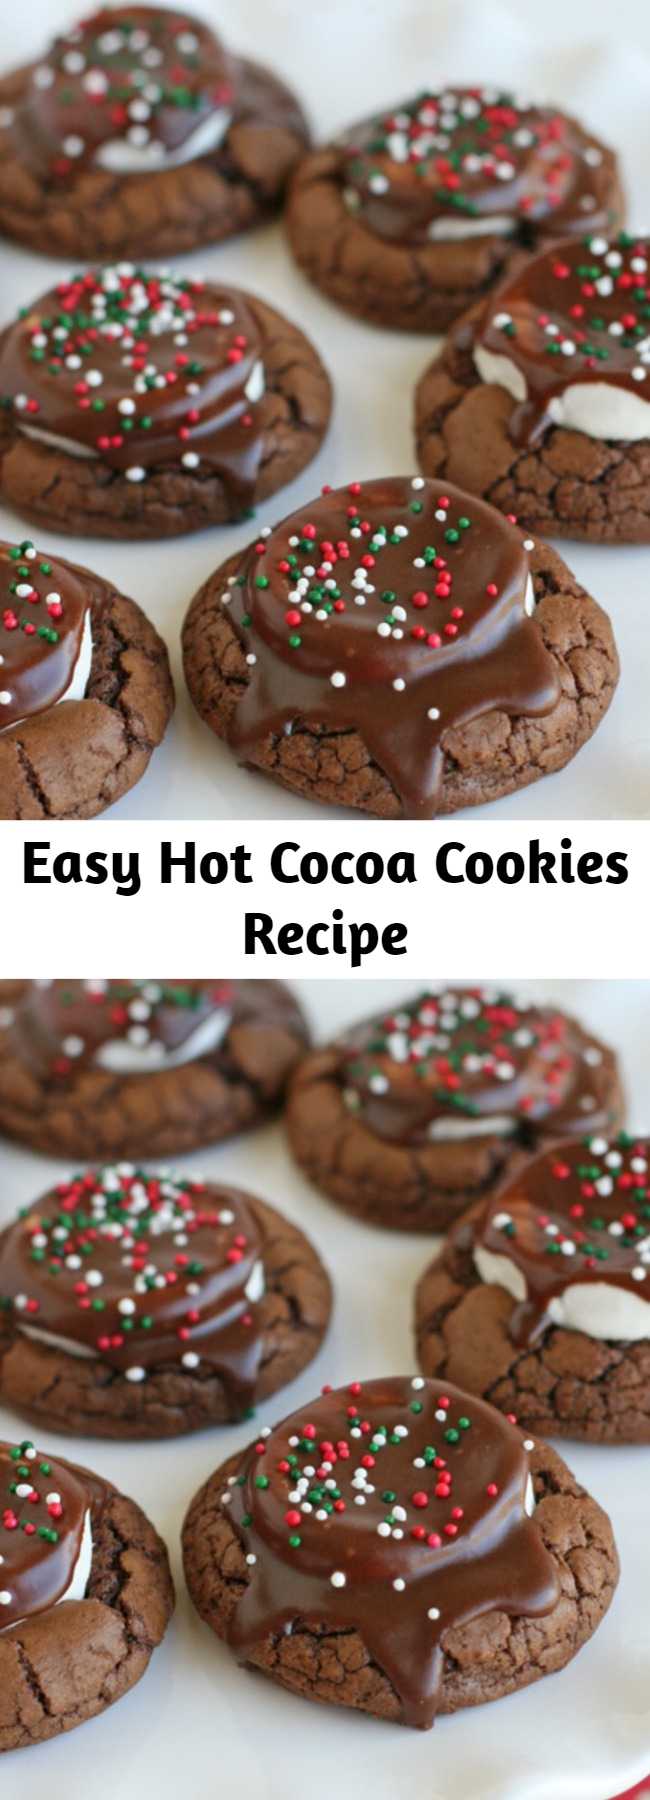 Easy Hot Cocoa Cookies Recipe - These Hot Cocoa Cookies are rich, chewy, chocolaty and oh so delicious! These are a perfect cookie for Christmas, or any time of year!